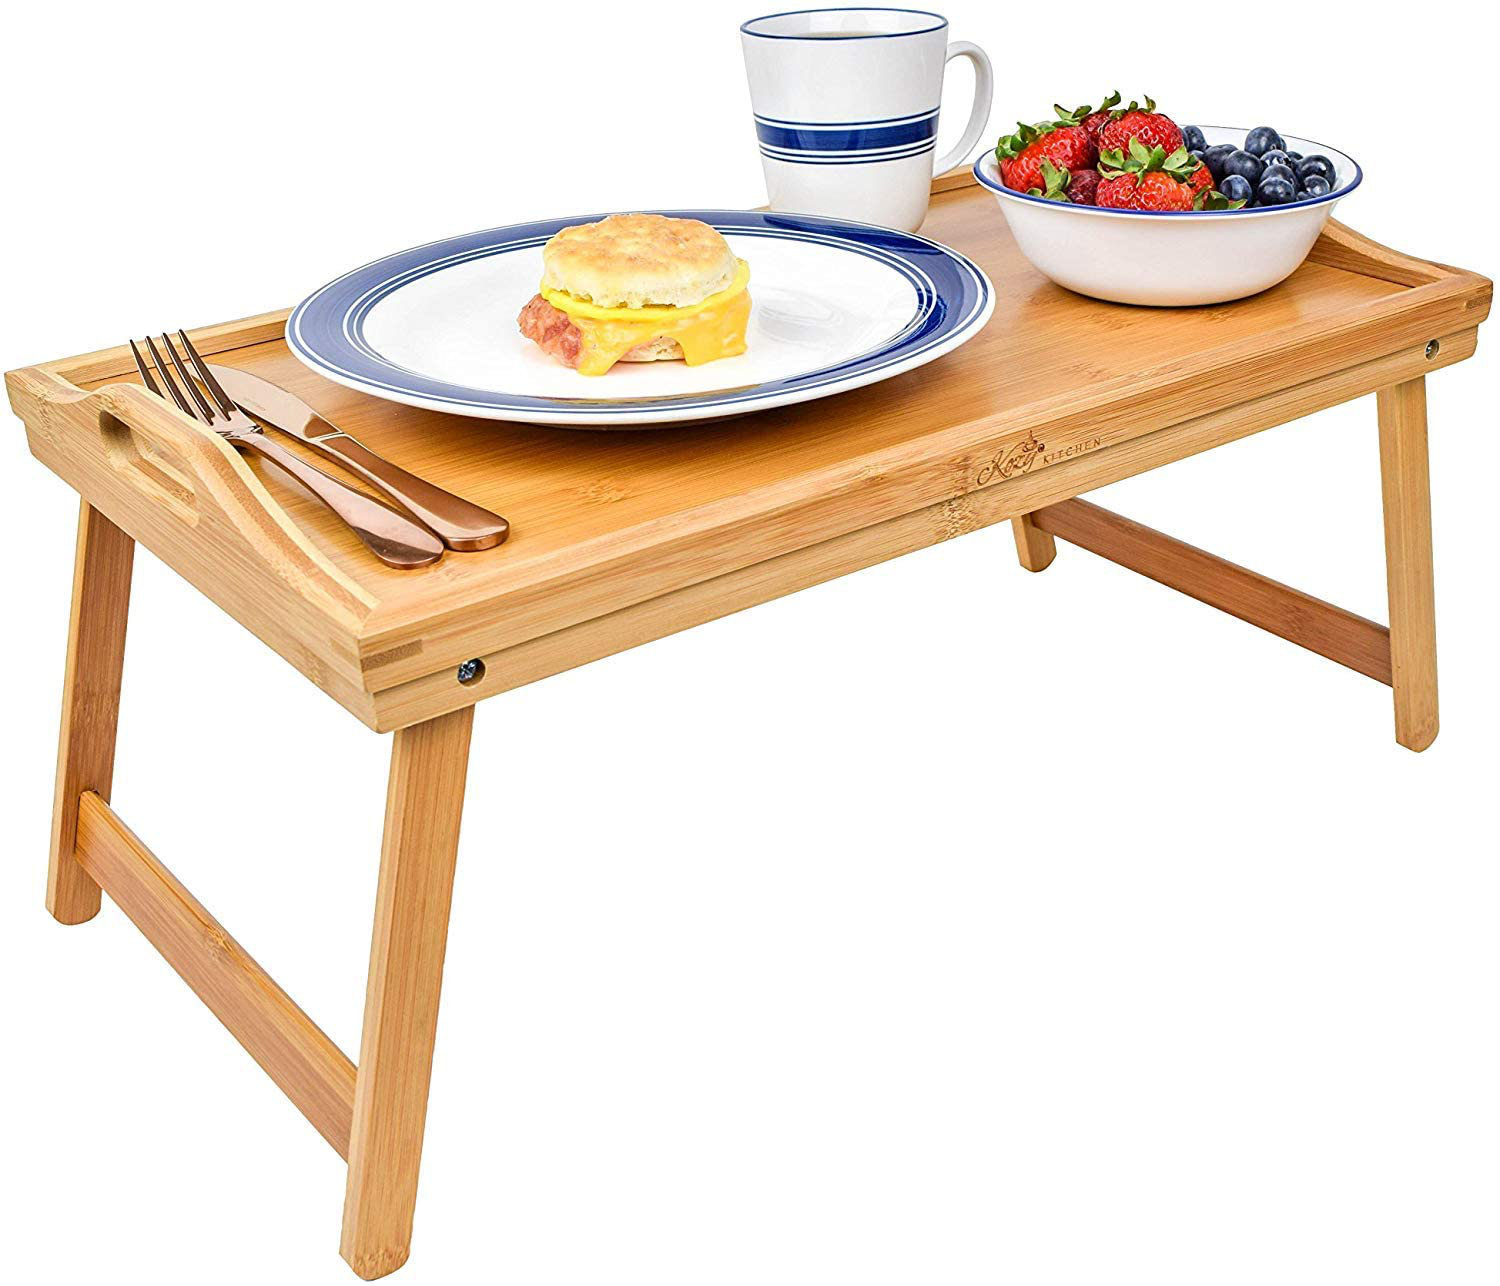 FOLDING BAMBOO WOODEN BREAKFAST BED TRAY LAP TRAY BED DINING TABLE SERVING TRAY 